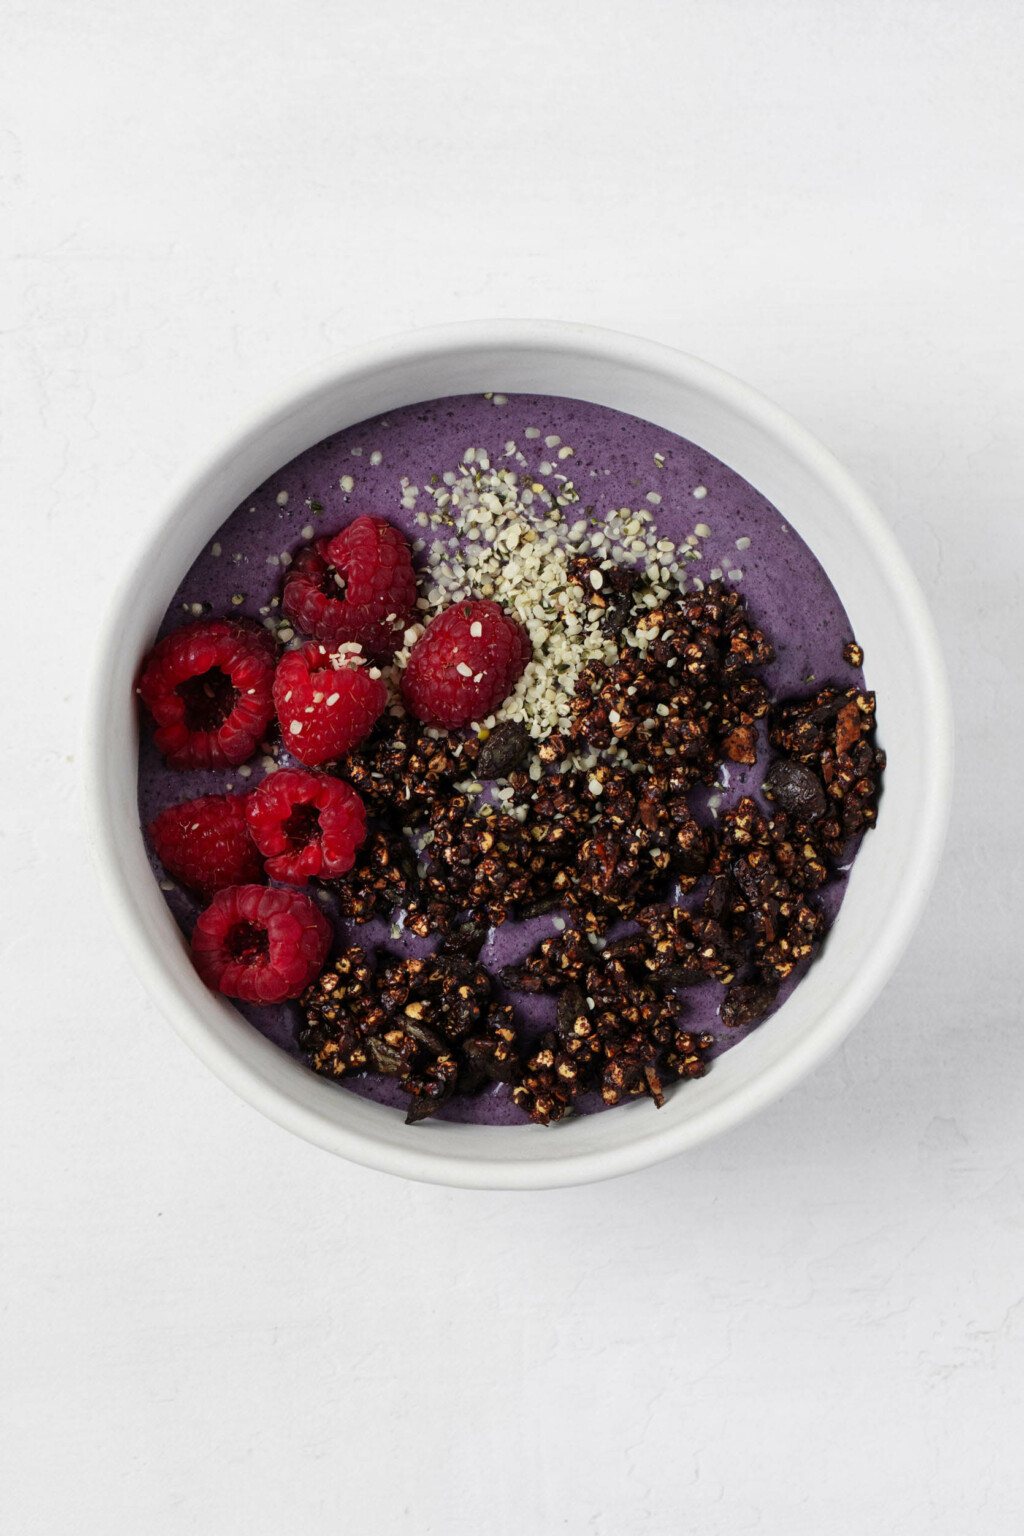 An overhead image of a colorful açaí bowl, which is topped with dark cocoa dusted buckwheat clusters.